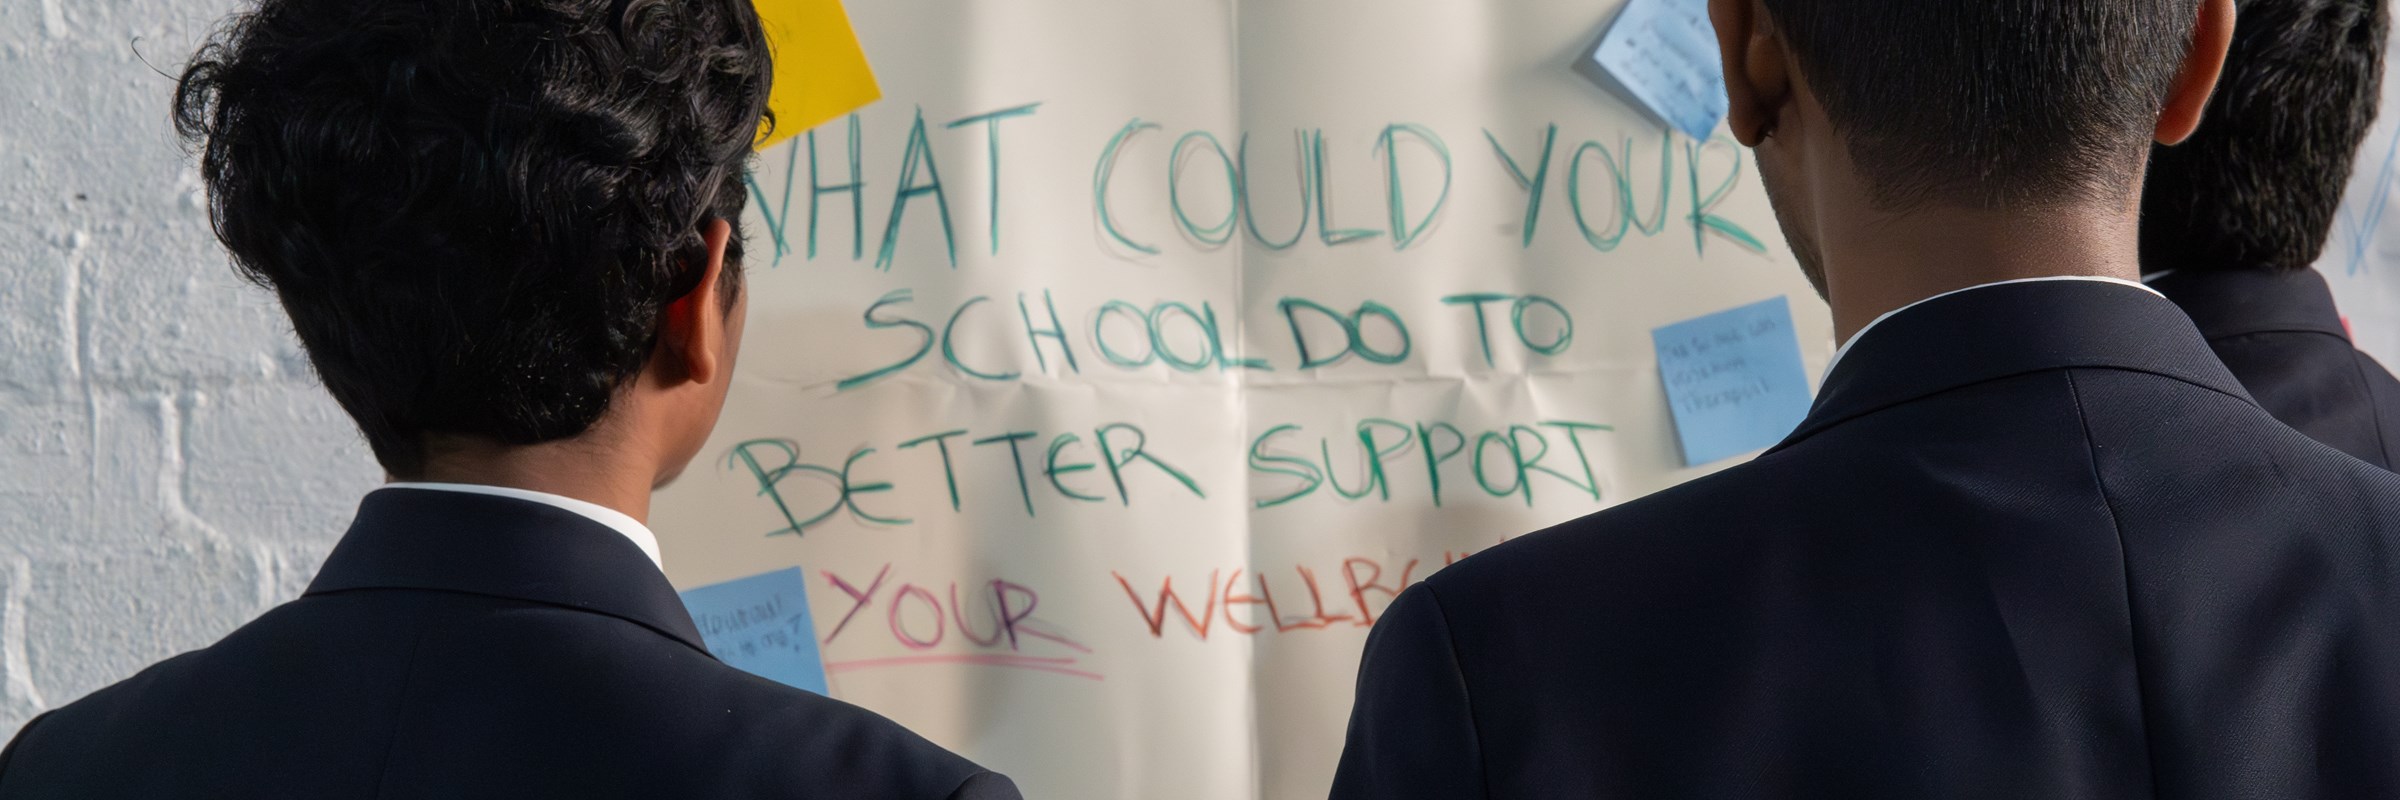 Three school children looking at a poster asking: 'What could your school do to better support you wellbeing?'